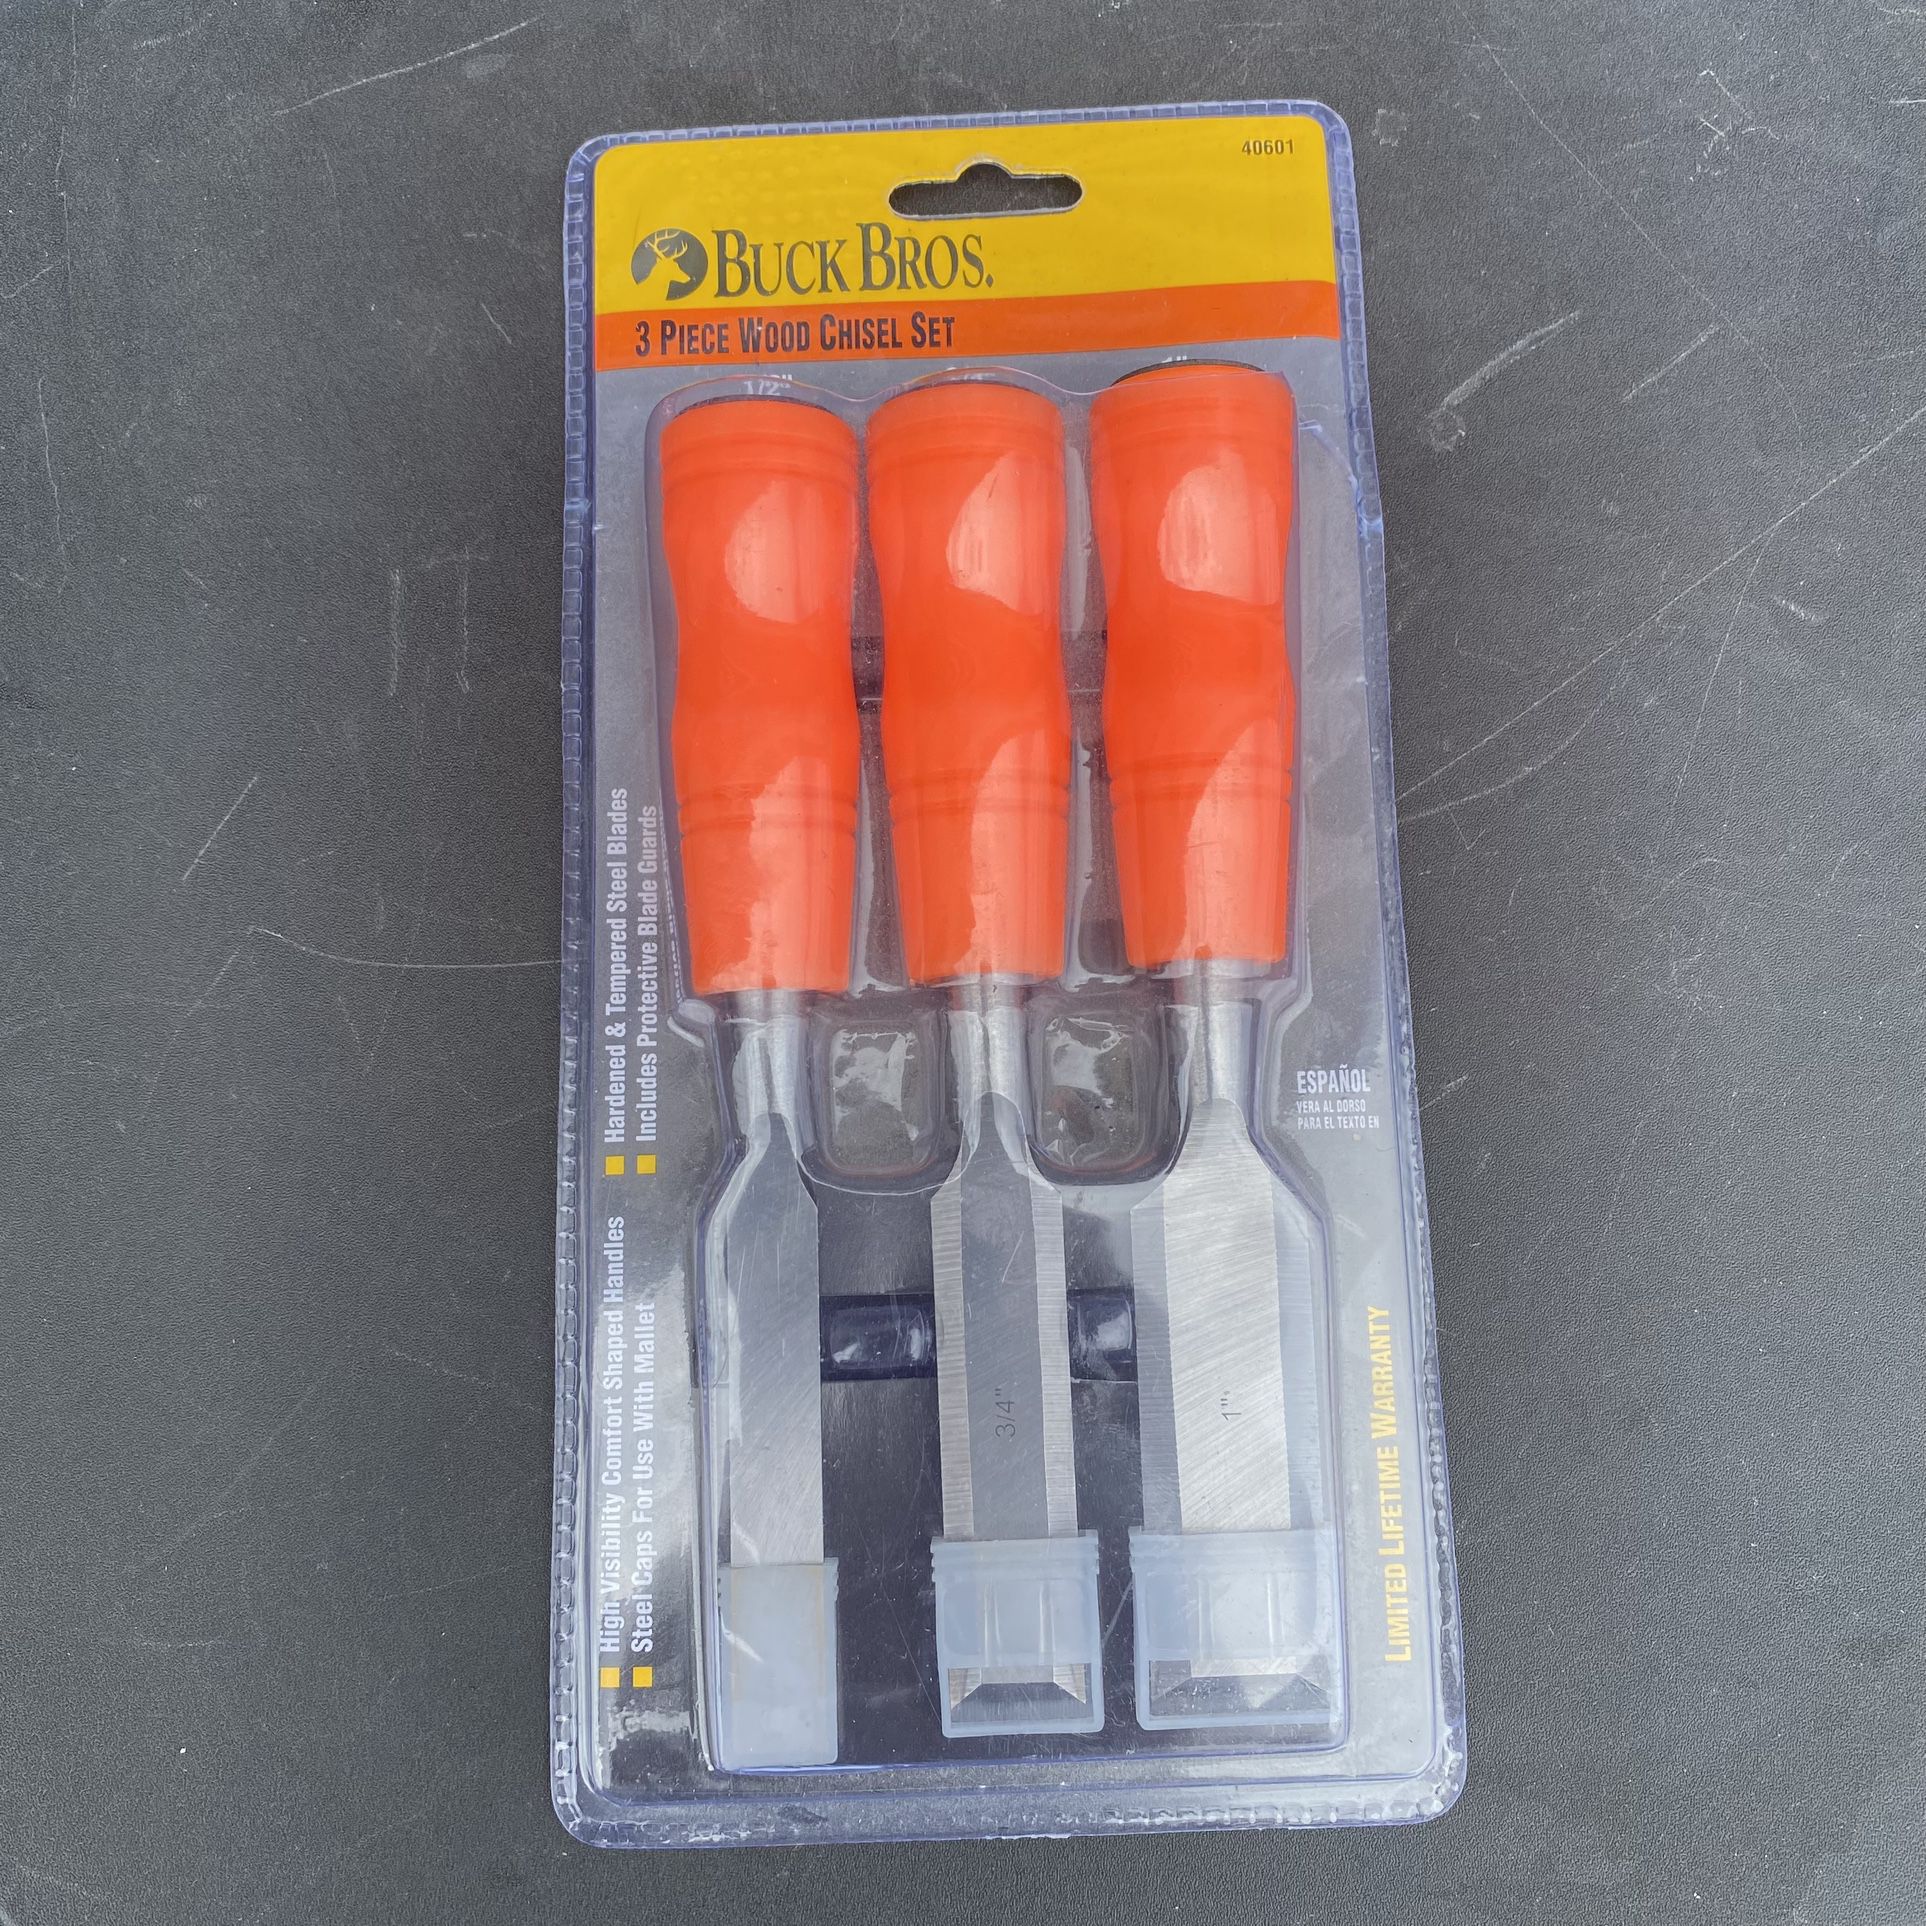 Woodworking chisel set by Buck Bros